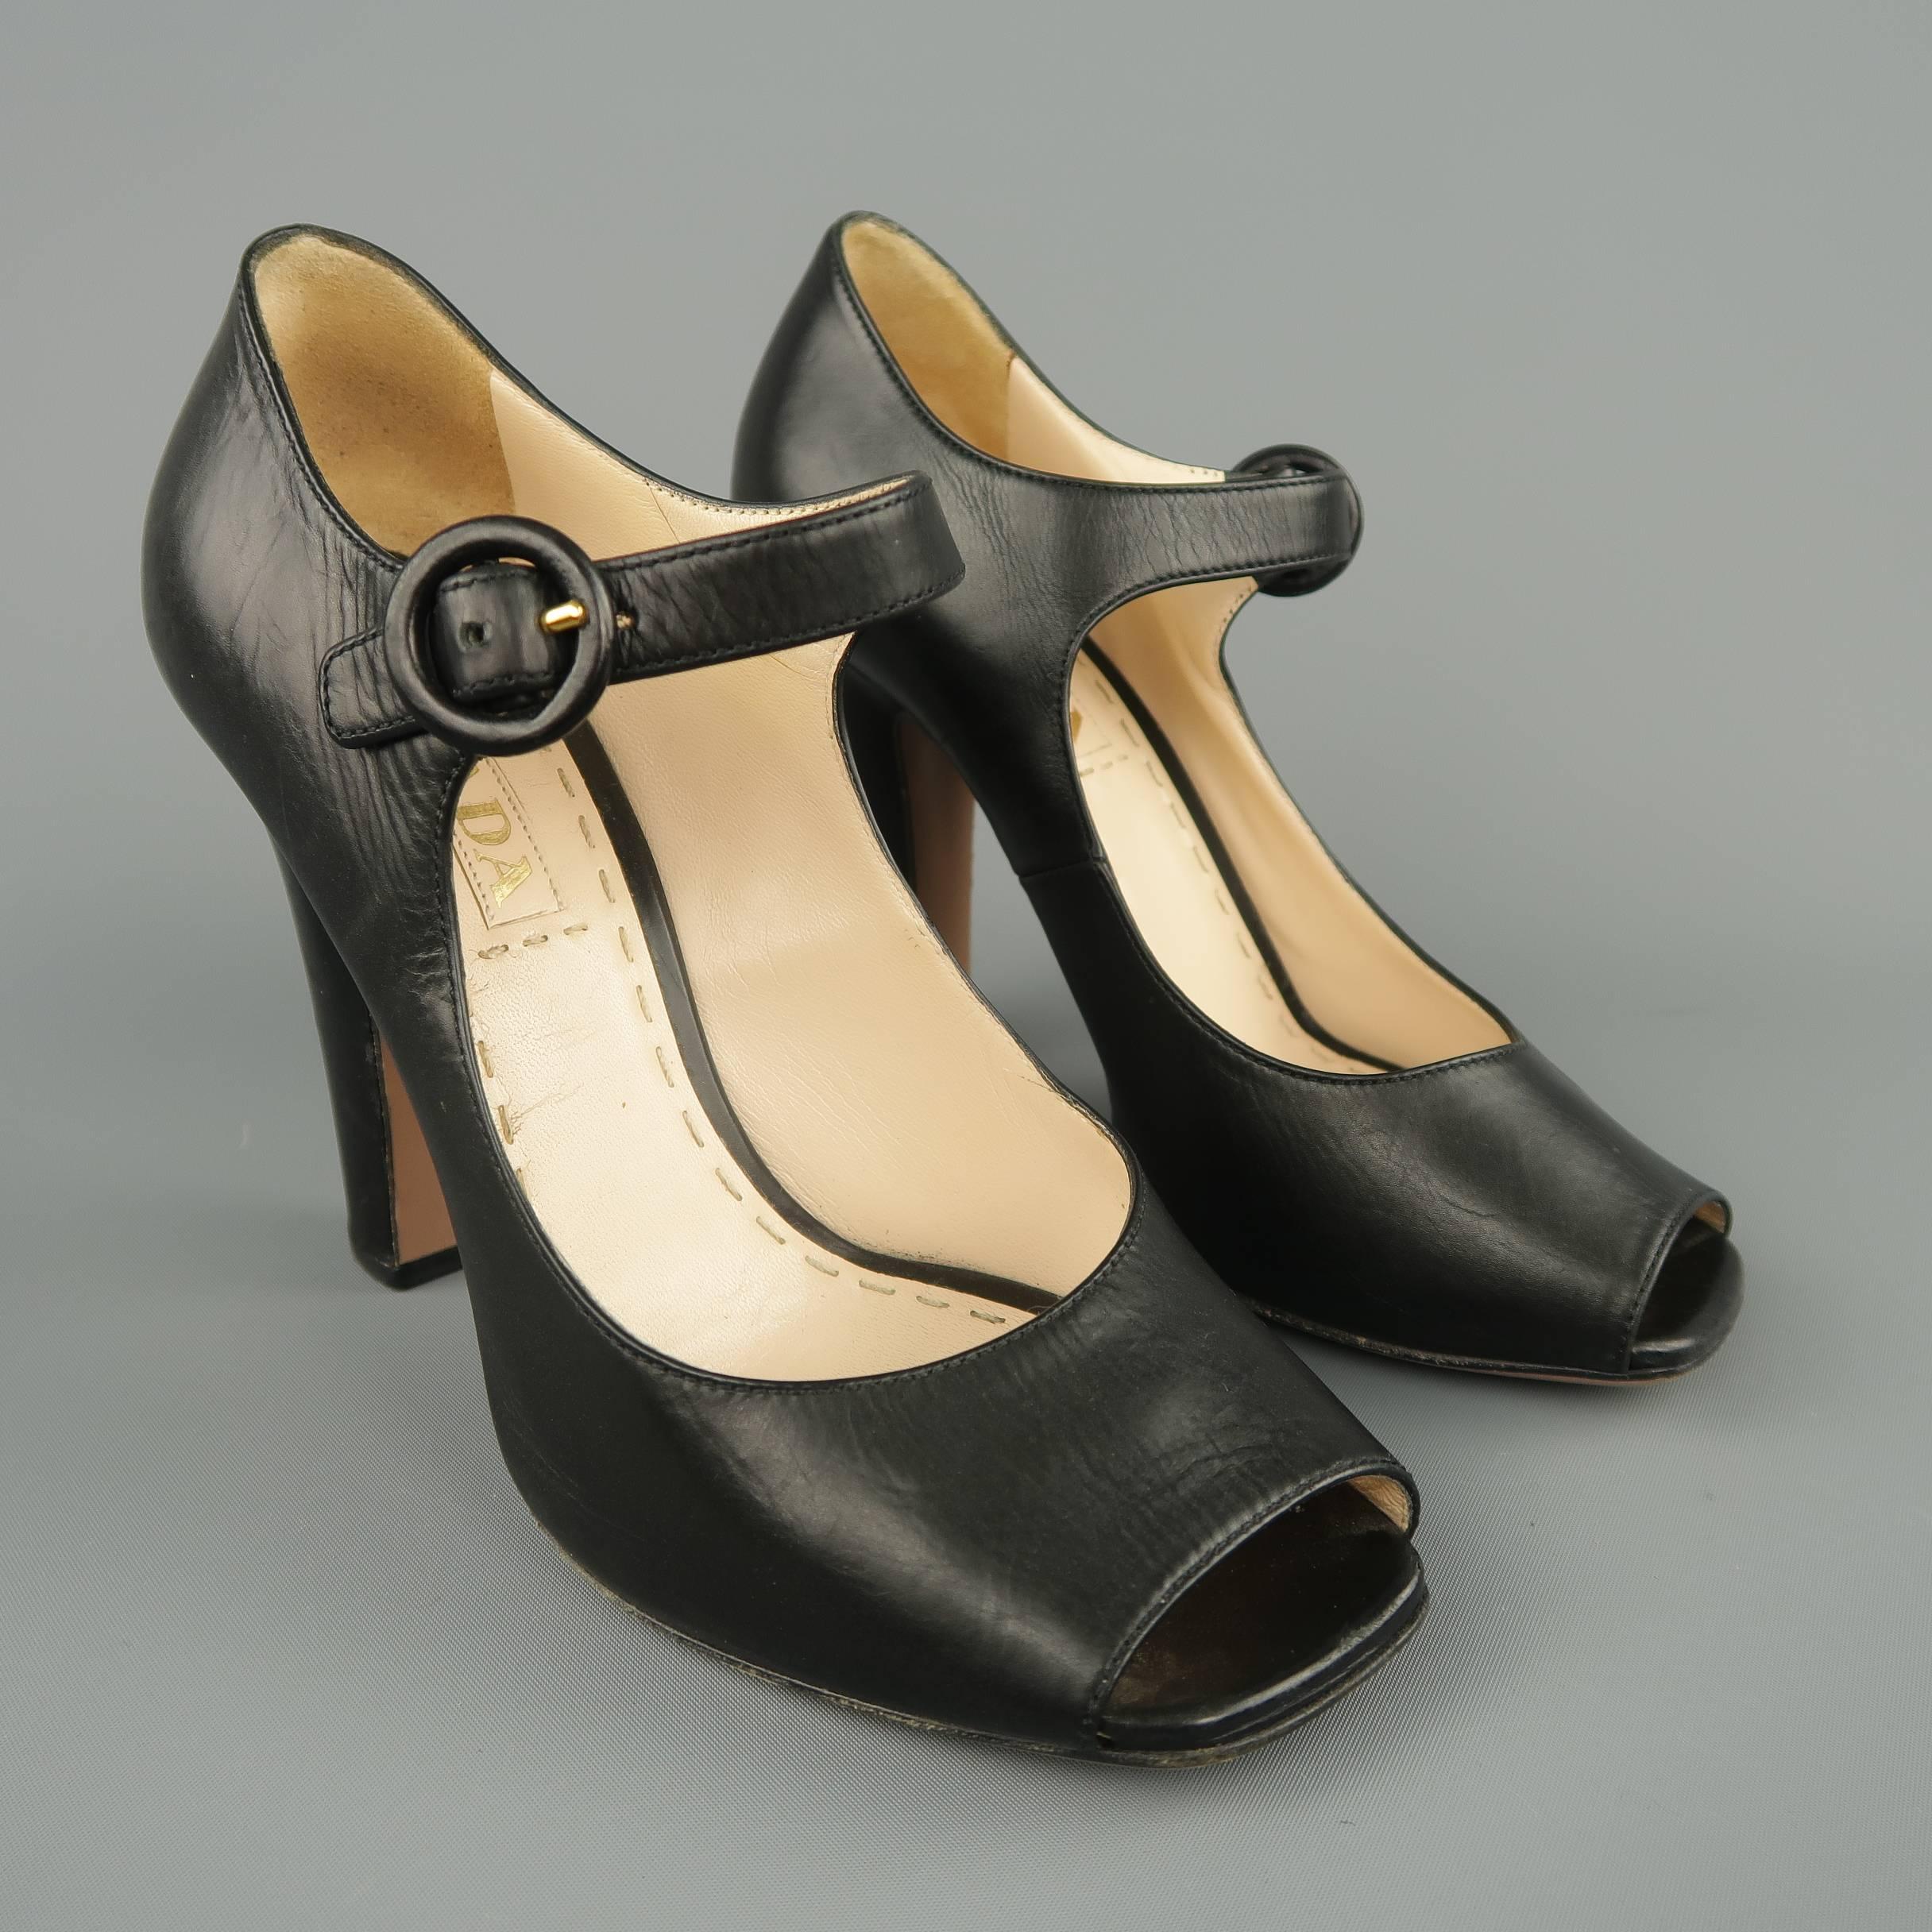 PRADA pumps come in smooth black leather and feature a square peep toe, thick covered heel, and Mary Jane strap. Made in Italy.
 
Good Pre-Owned Condition.
Marked: IT 37.5
 
Measurements:
 
Heel: 4 in.
